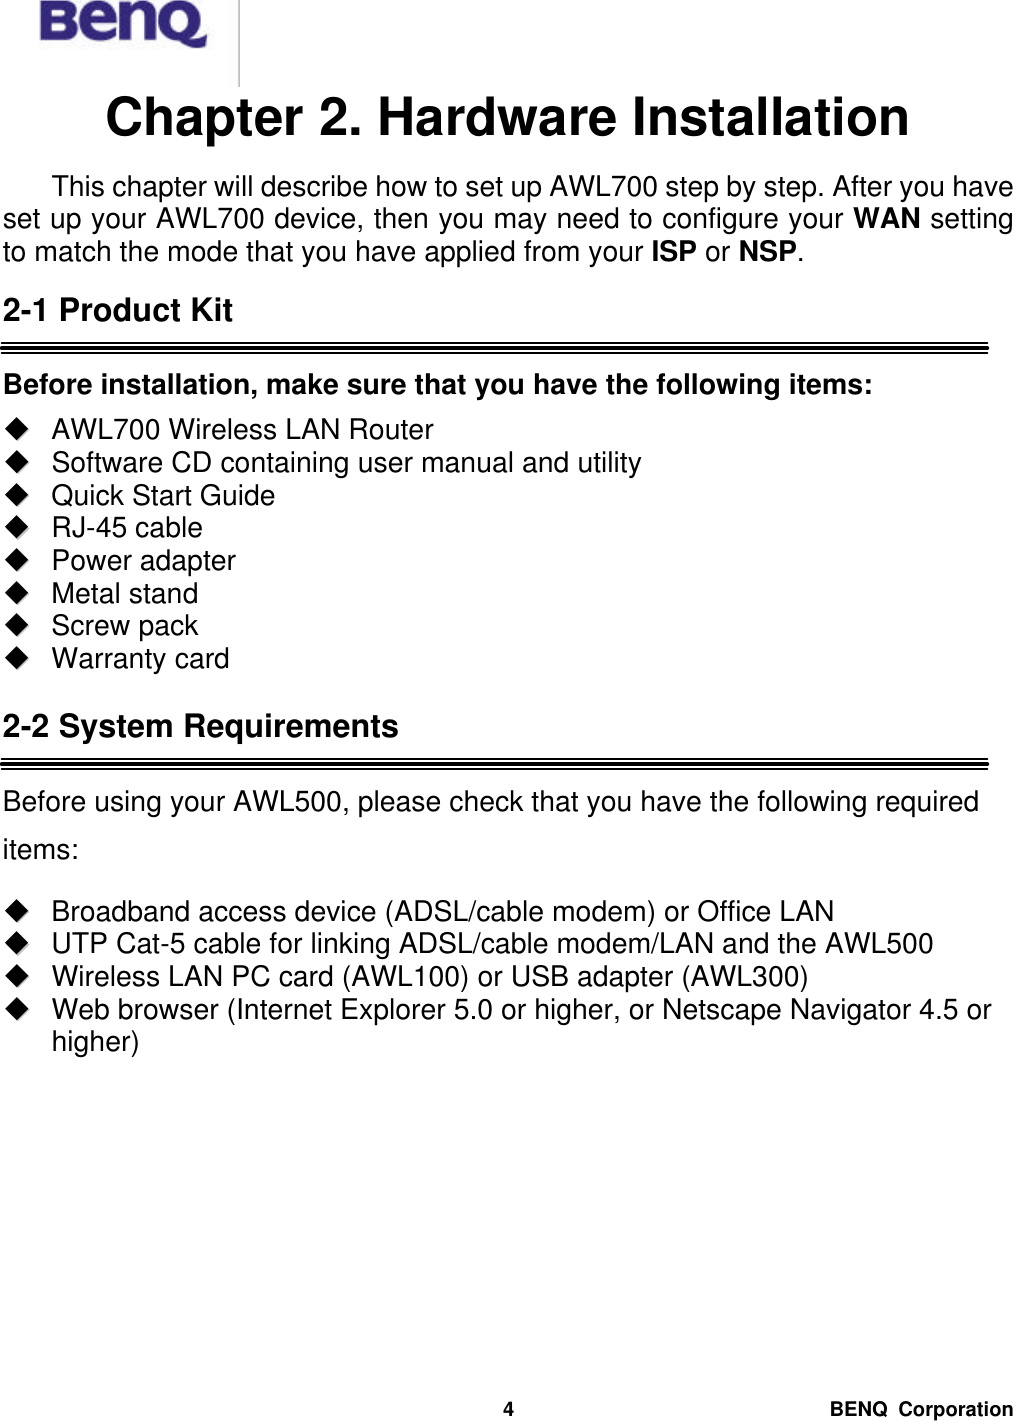  BENQ Corporation 4Chapter 2. Hardware Installation   This chapter will describe how to set up AWL700 step by step. After you have set up your AWL700 device, then you may need to configure your WAN setting to match the mode that you have applied from your ISP or NSP.  2-1 Product Kit  Before installation, make sure that you have the following items: uu  AWL700 Wireless LAN Router uu  Software CD containing user manual and utility uu  Quick Start Guide uu  RJ-45 cable uu  Power adapter   uu  Metal stand uu  Screw pack uu  Warranty card  2-2 System Requirements  Before using your AWL500, please check that you have the following required items: uu  Broadband access device (ADSL/cable modem) or Office LAN uu  UTP Cat-5 cable for linking ADSL/cable modem/LAN and the AWL500 uu  Wireless LAN PC card (AWL100) or USB adapter (AWL300) uu  Web browser (Internet Explorer 5.0 or higher, or Netscape Navigator 4.5 or higher) 